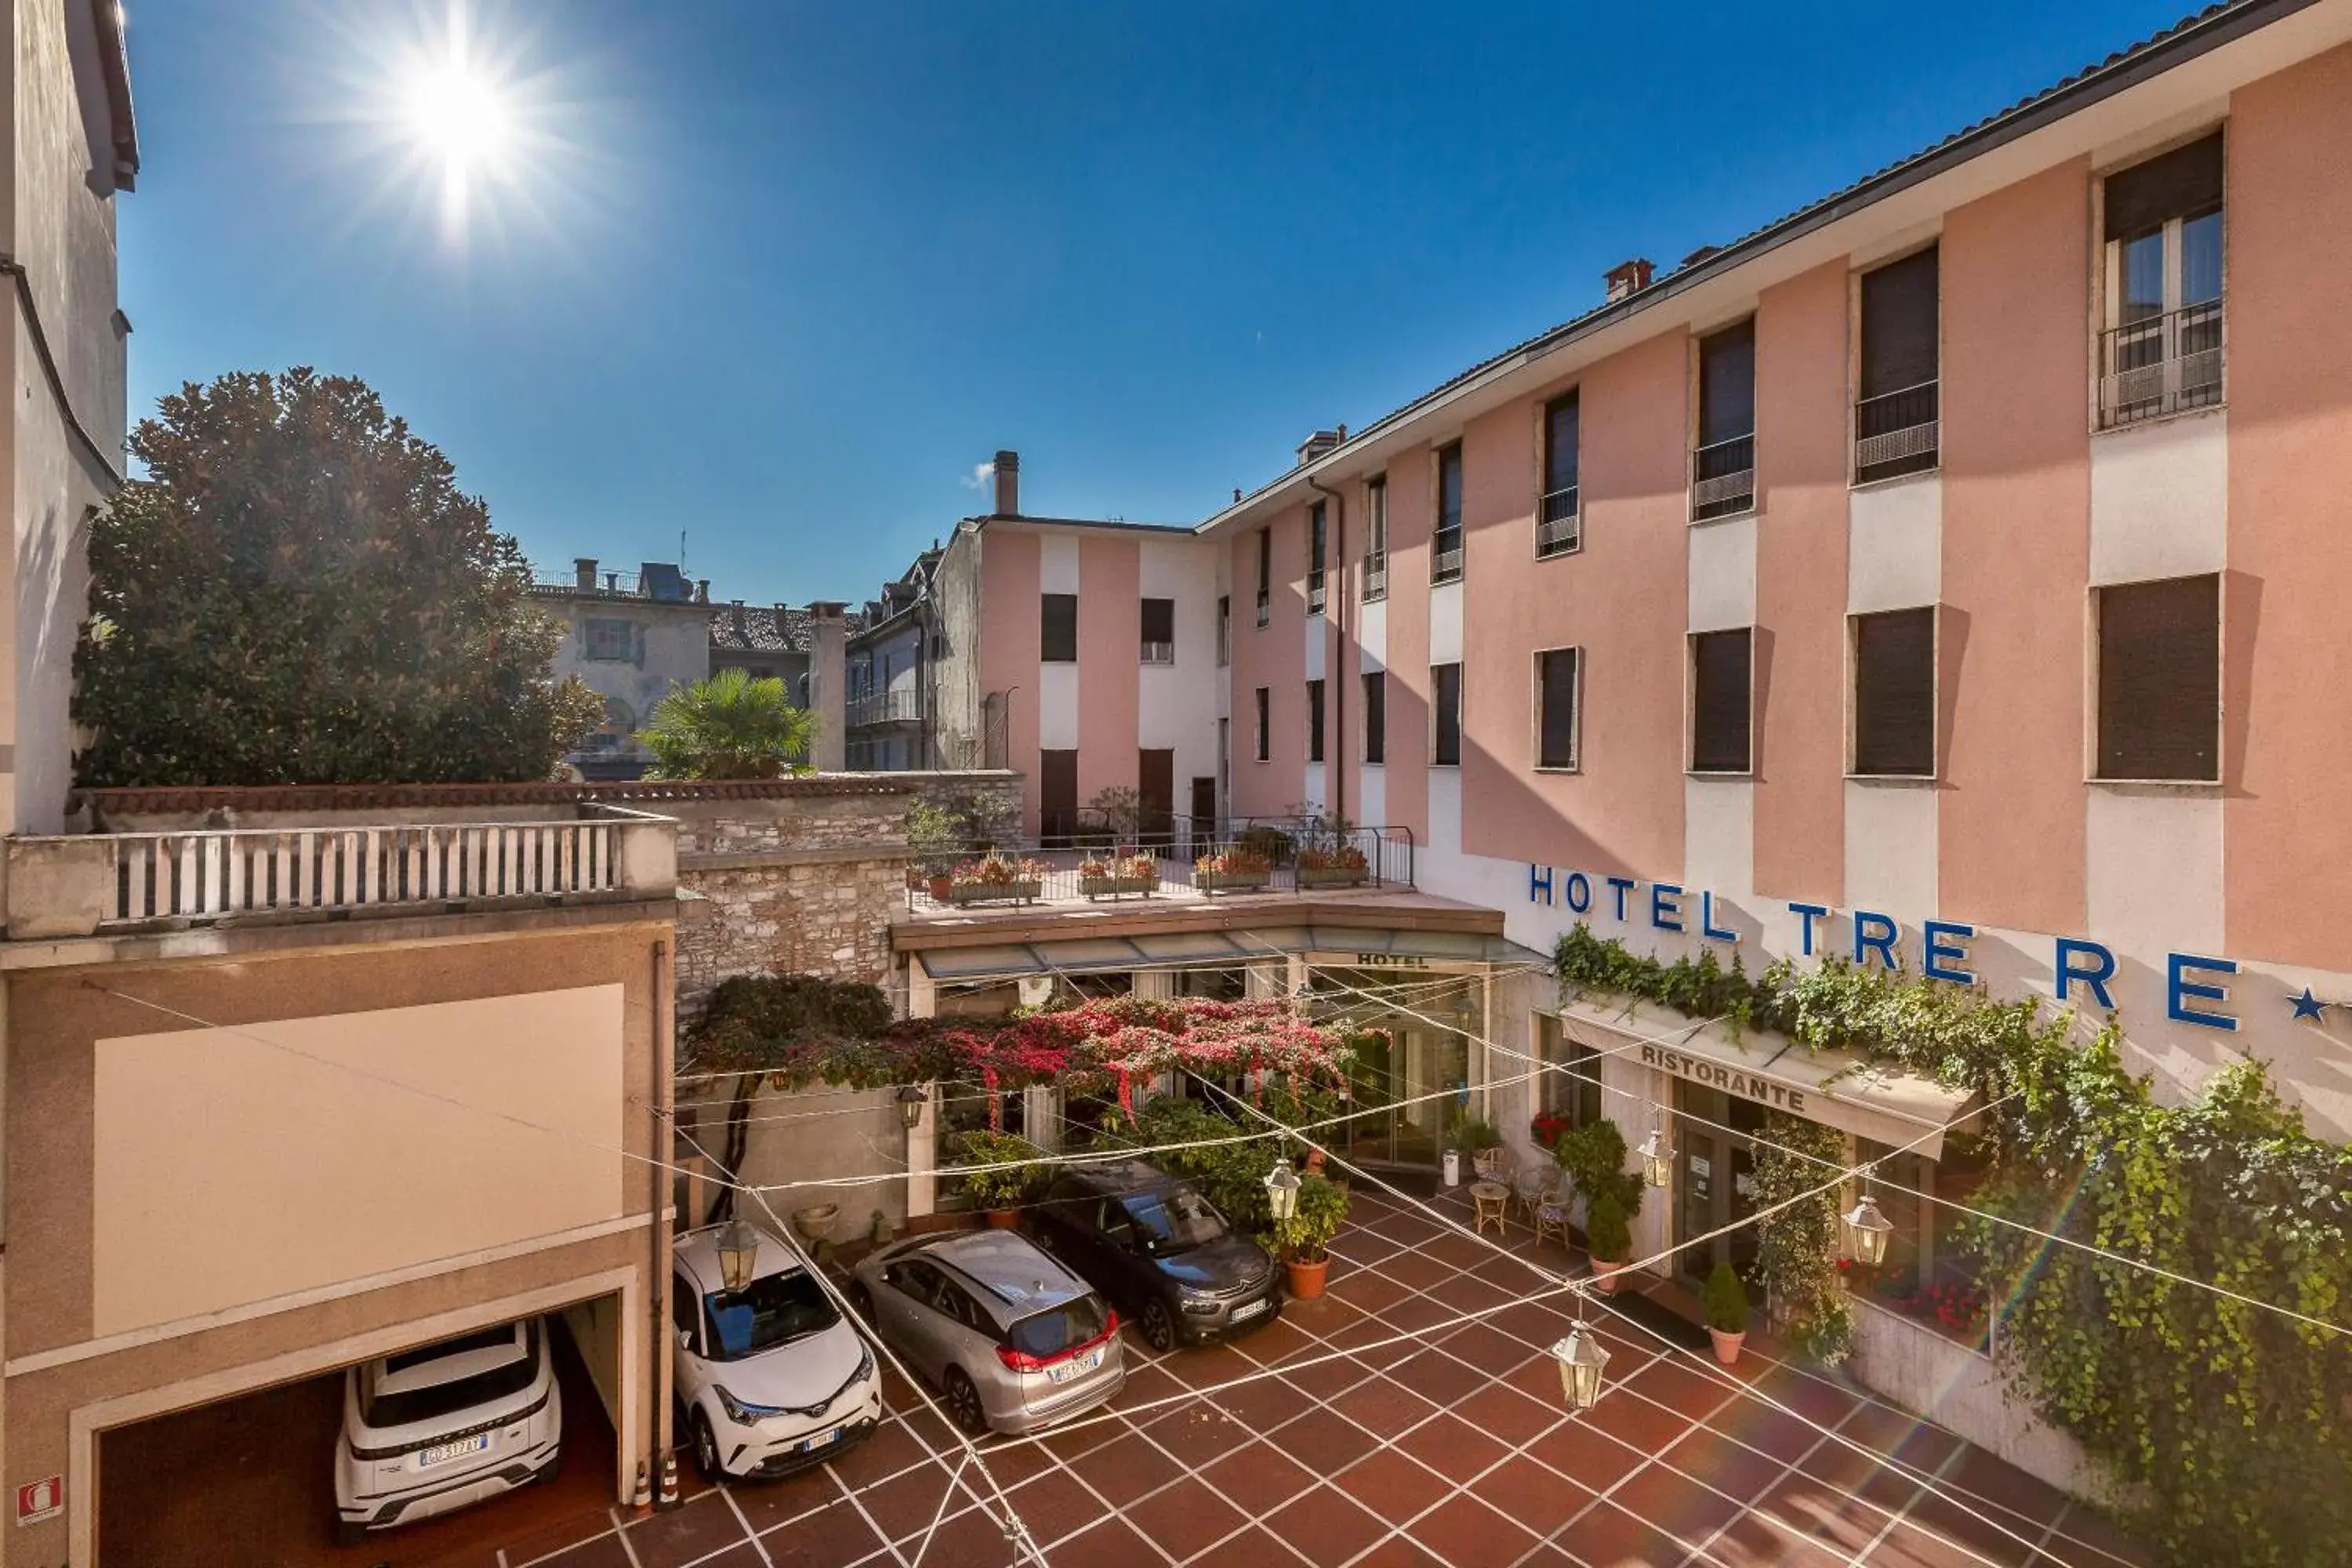 Property building in Hotel Tre Re